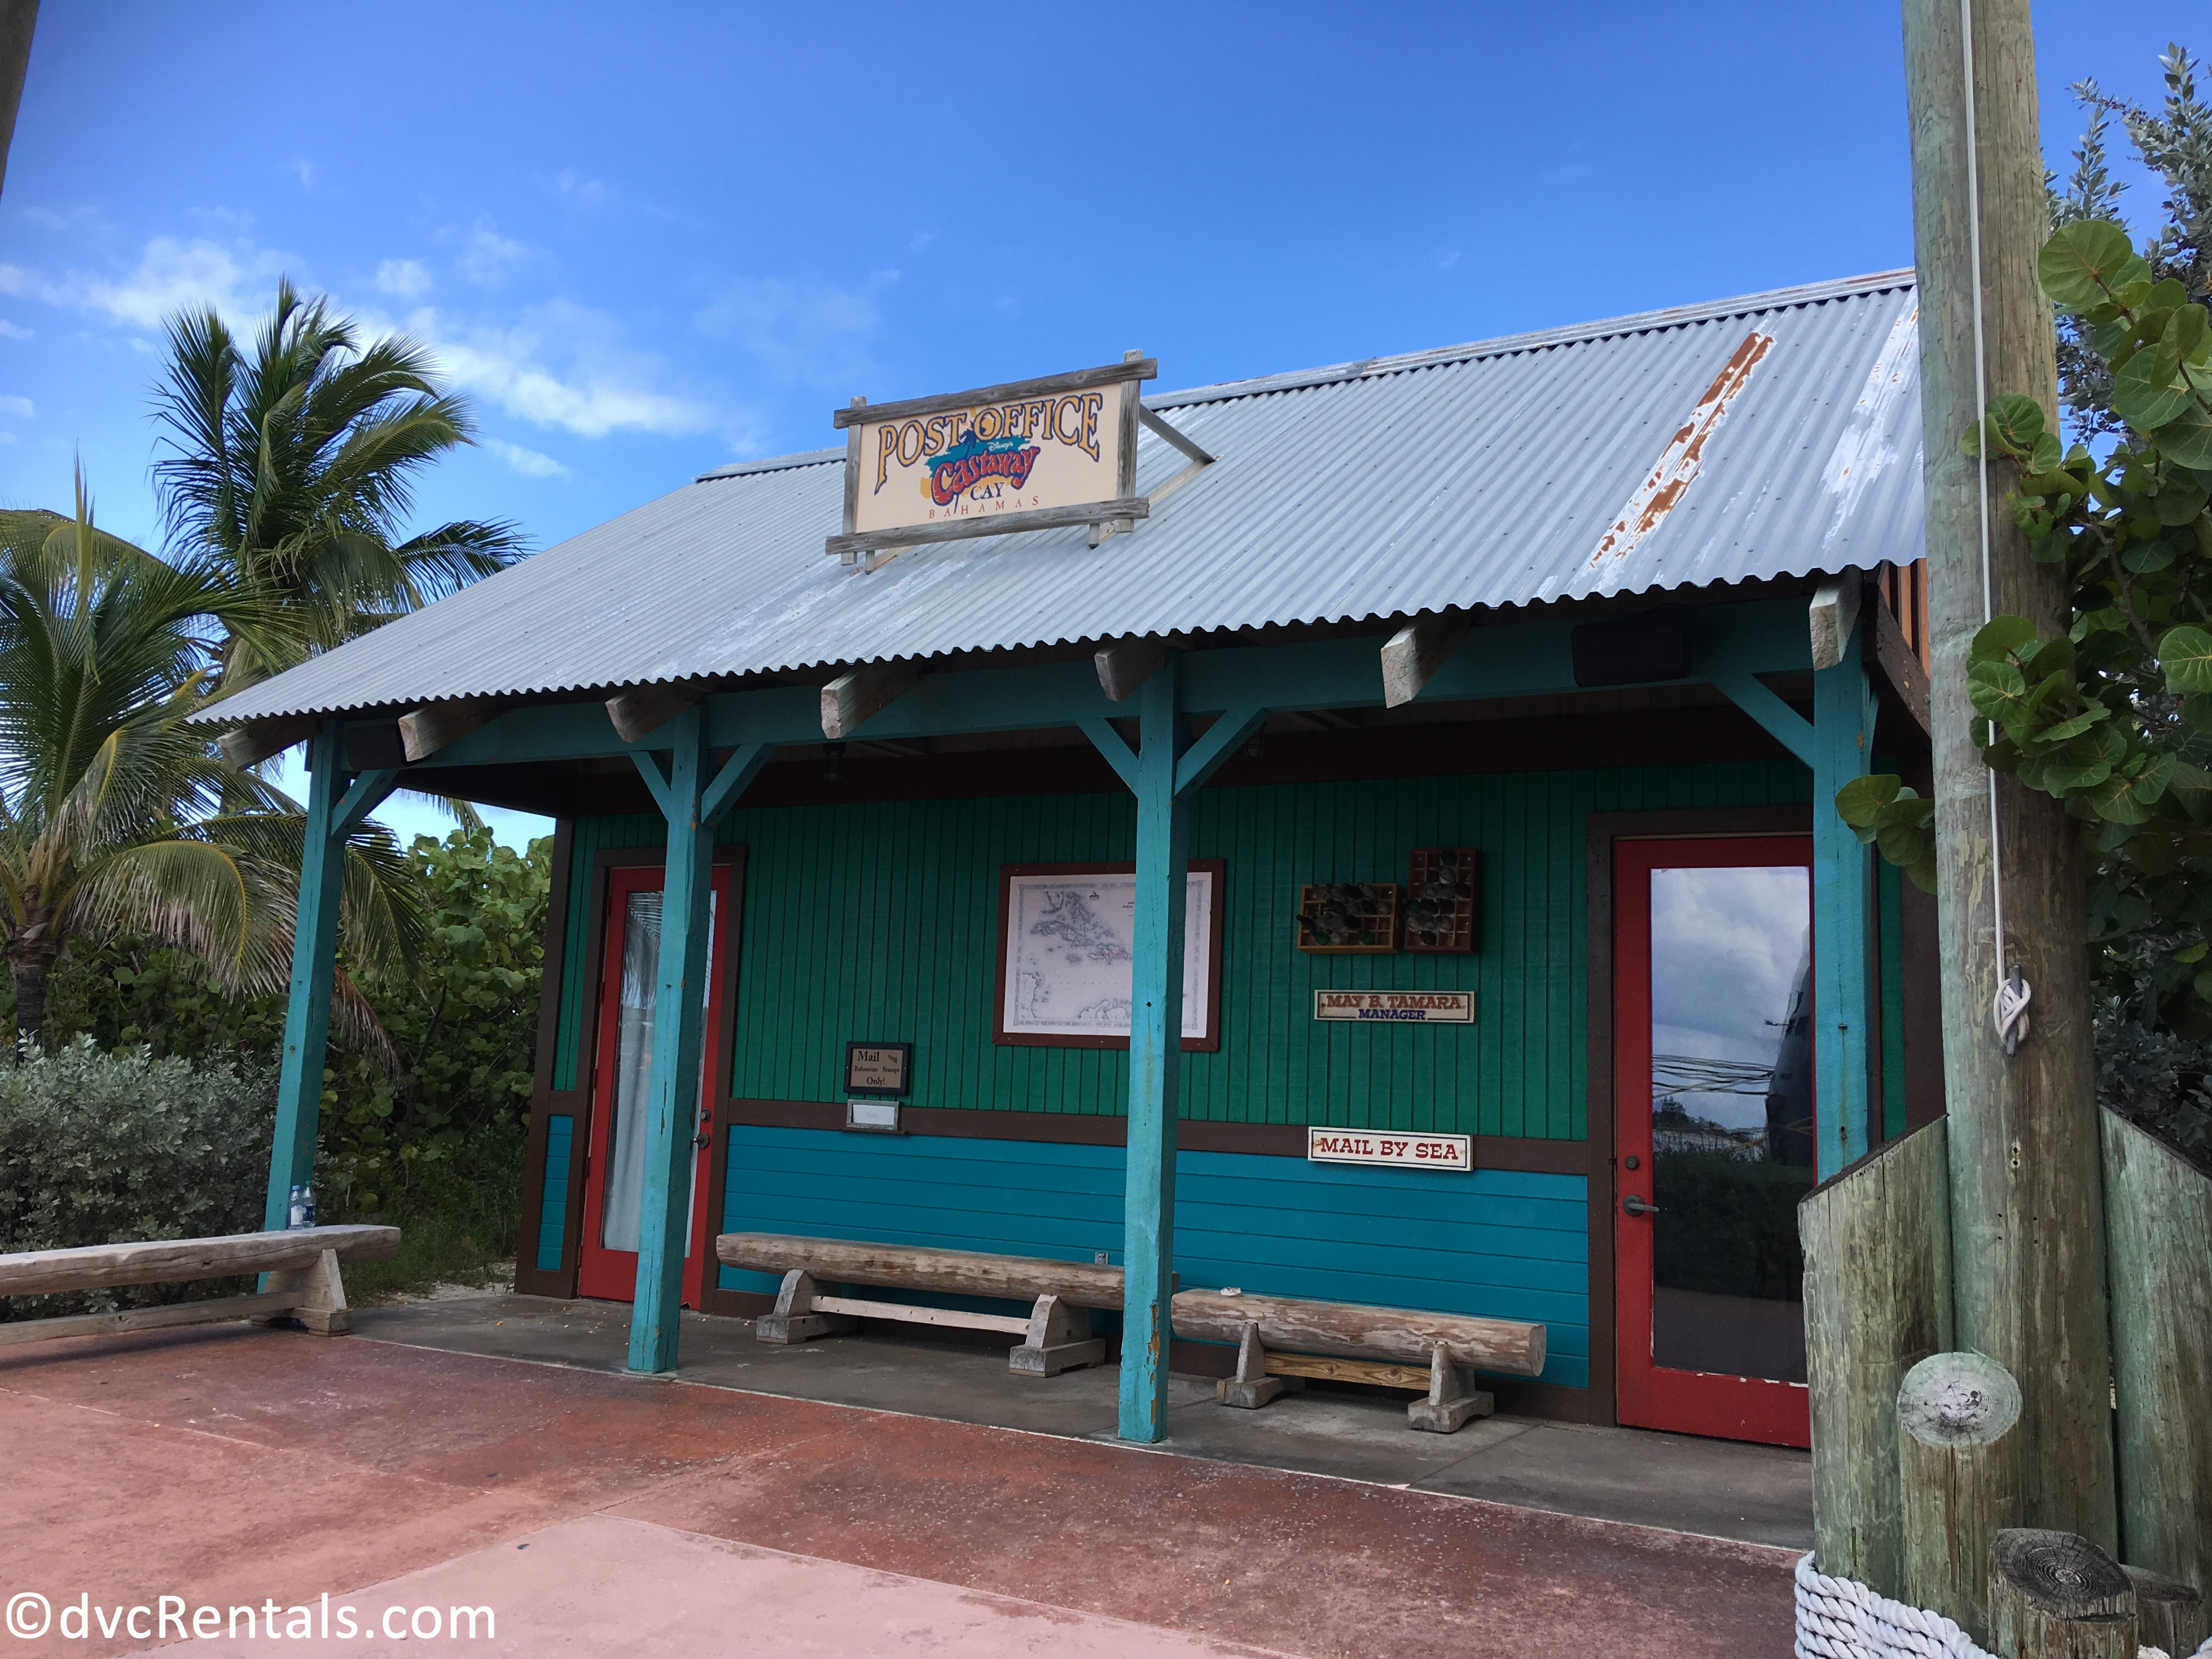 Exterior image of the Castaway Cay Post office